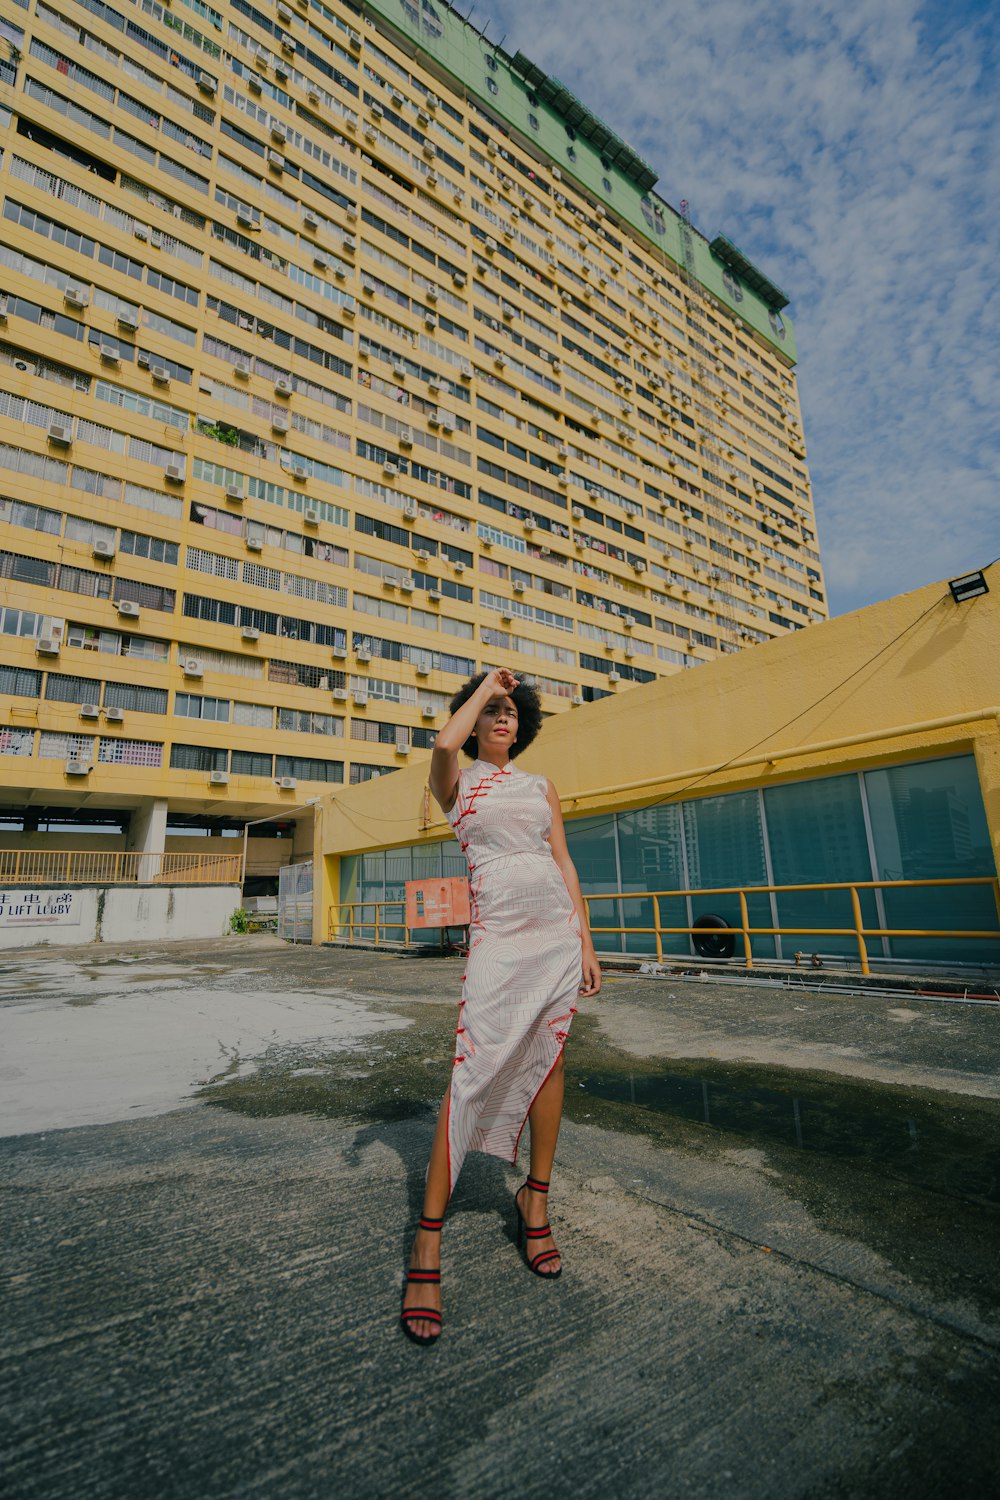 woman in white dress standing near brown building during daytime